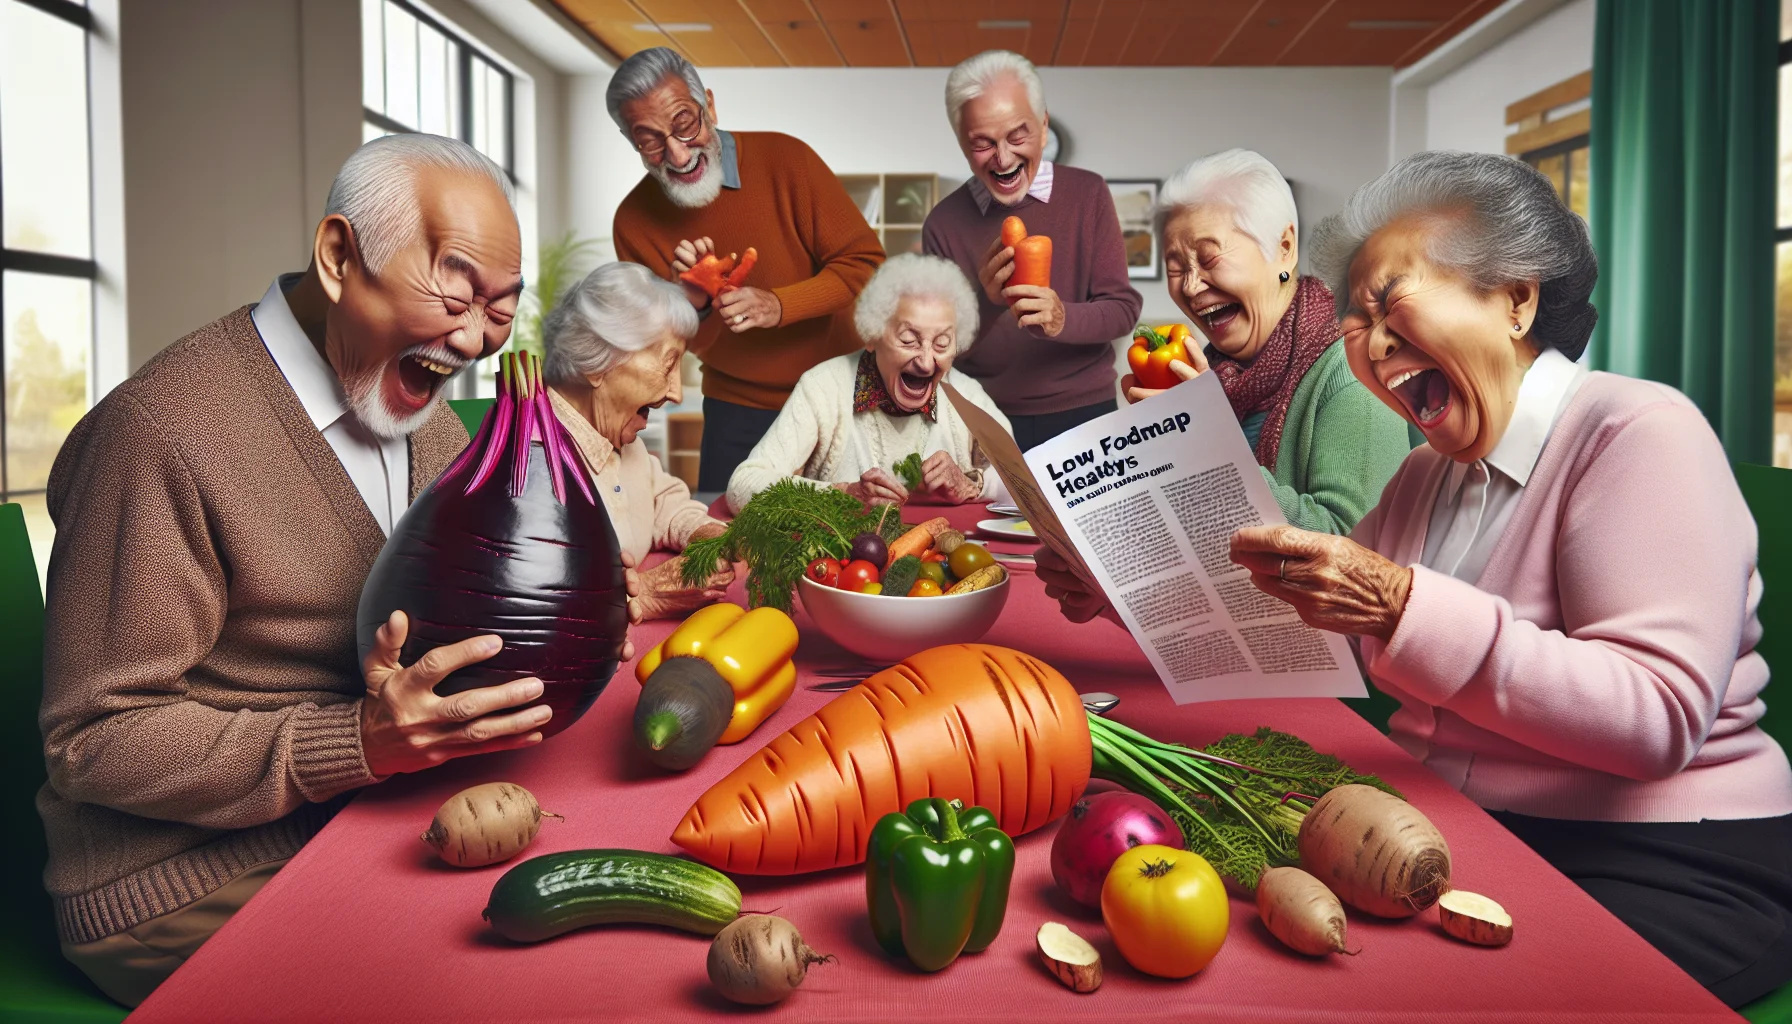 Create a humorously realistic image set in a lively senior center. A group of elderly individuals is gathered around a table laden with a variety of low fodmap, high-fiber foods. Each person is interacting delightfully with the food. An Asian man playfully struggles with an unusually large carrot while a Caucasian woman amusingly examines a robust beetroot. A South Asian lady laughs while studying a detailed pamphlet titled 'The Joy of Healthy Eating - Low FODMAP.' An African woman breaks into laughter, having just taken a bite of a peculiarly shaped bell pepper. In the background, other elders, each of a different descent, engage in similar antics, creating a lively image celebrating the lighter side of maintaining a healthy diet in old age.